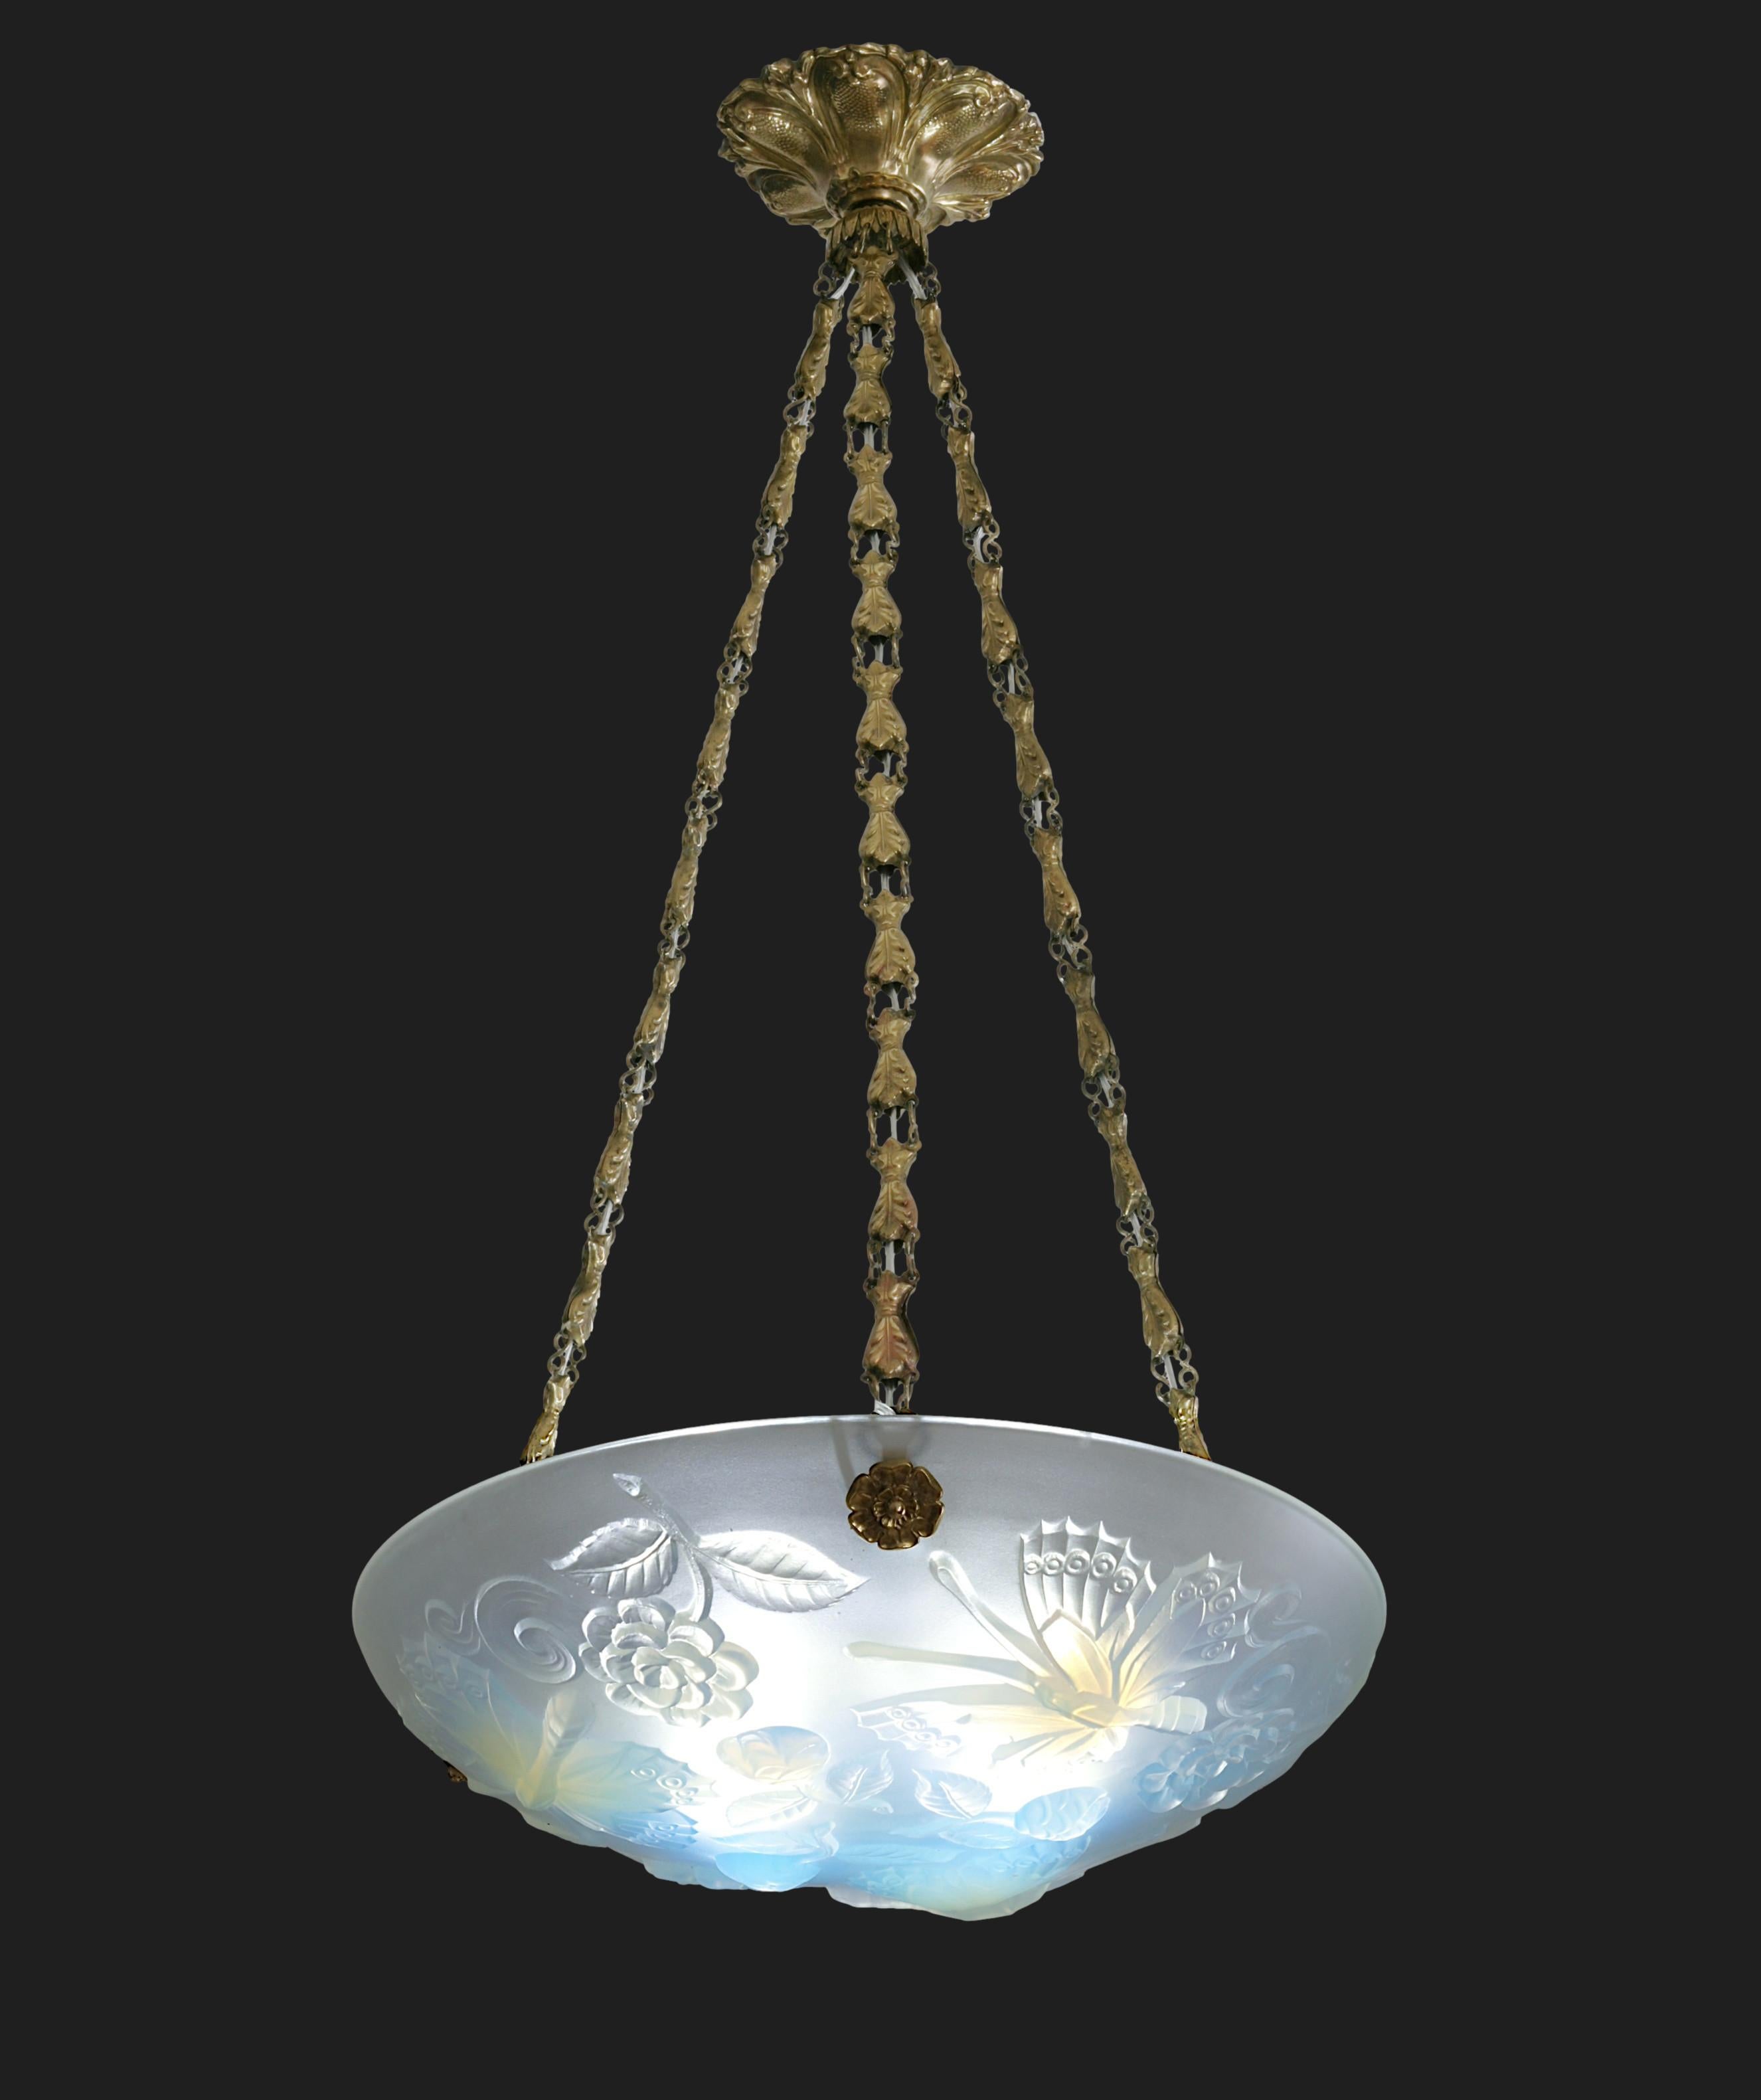 French Art Deco butterly pendant chandelier by Choisy-le-Roi (Paris), France, 1930s. Thick opalescent molded glass hung at its period stamped brass fixture. Measures: Height: 25